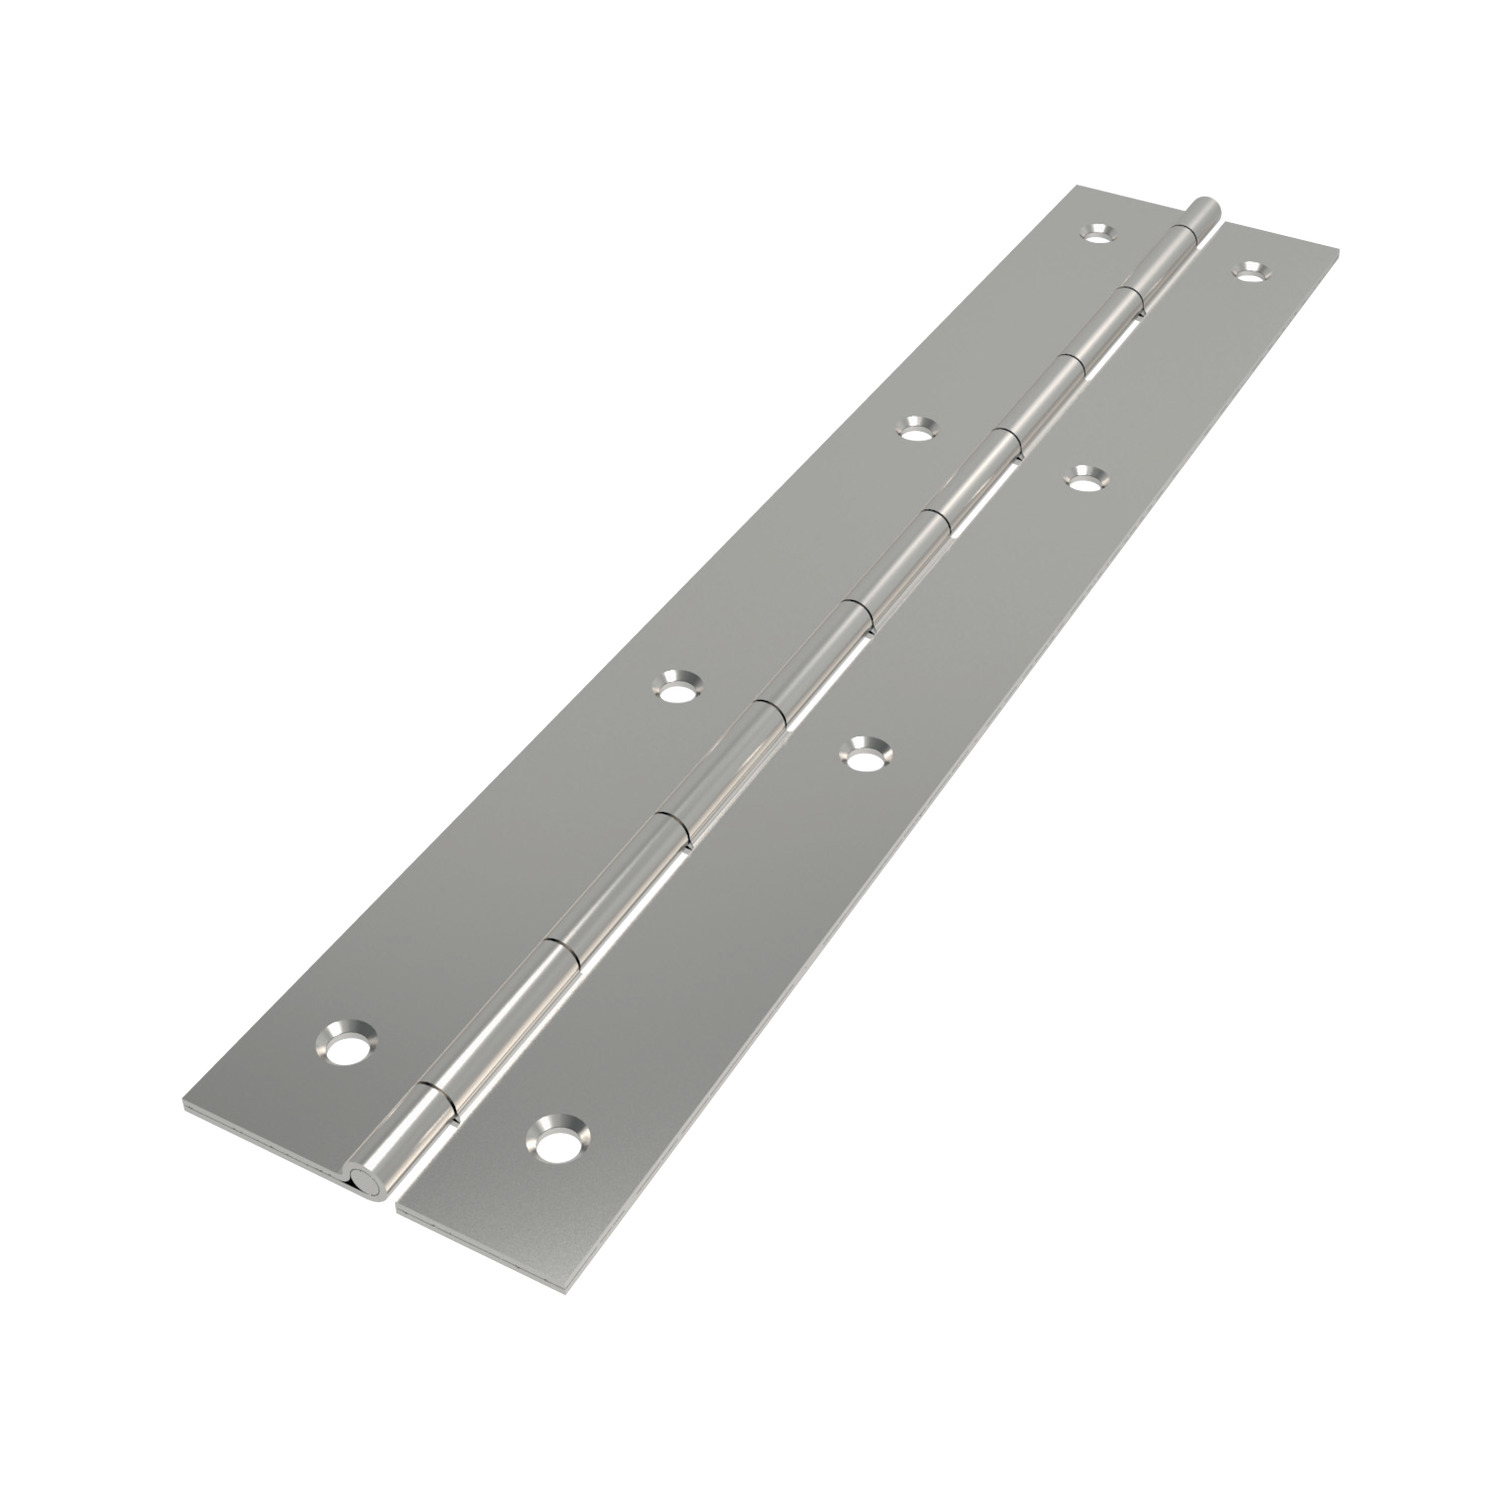 Surface Mount - Piano Hinges Surface screw mount piano hinges, made from stainless steel (AISI 304) with satin finish.